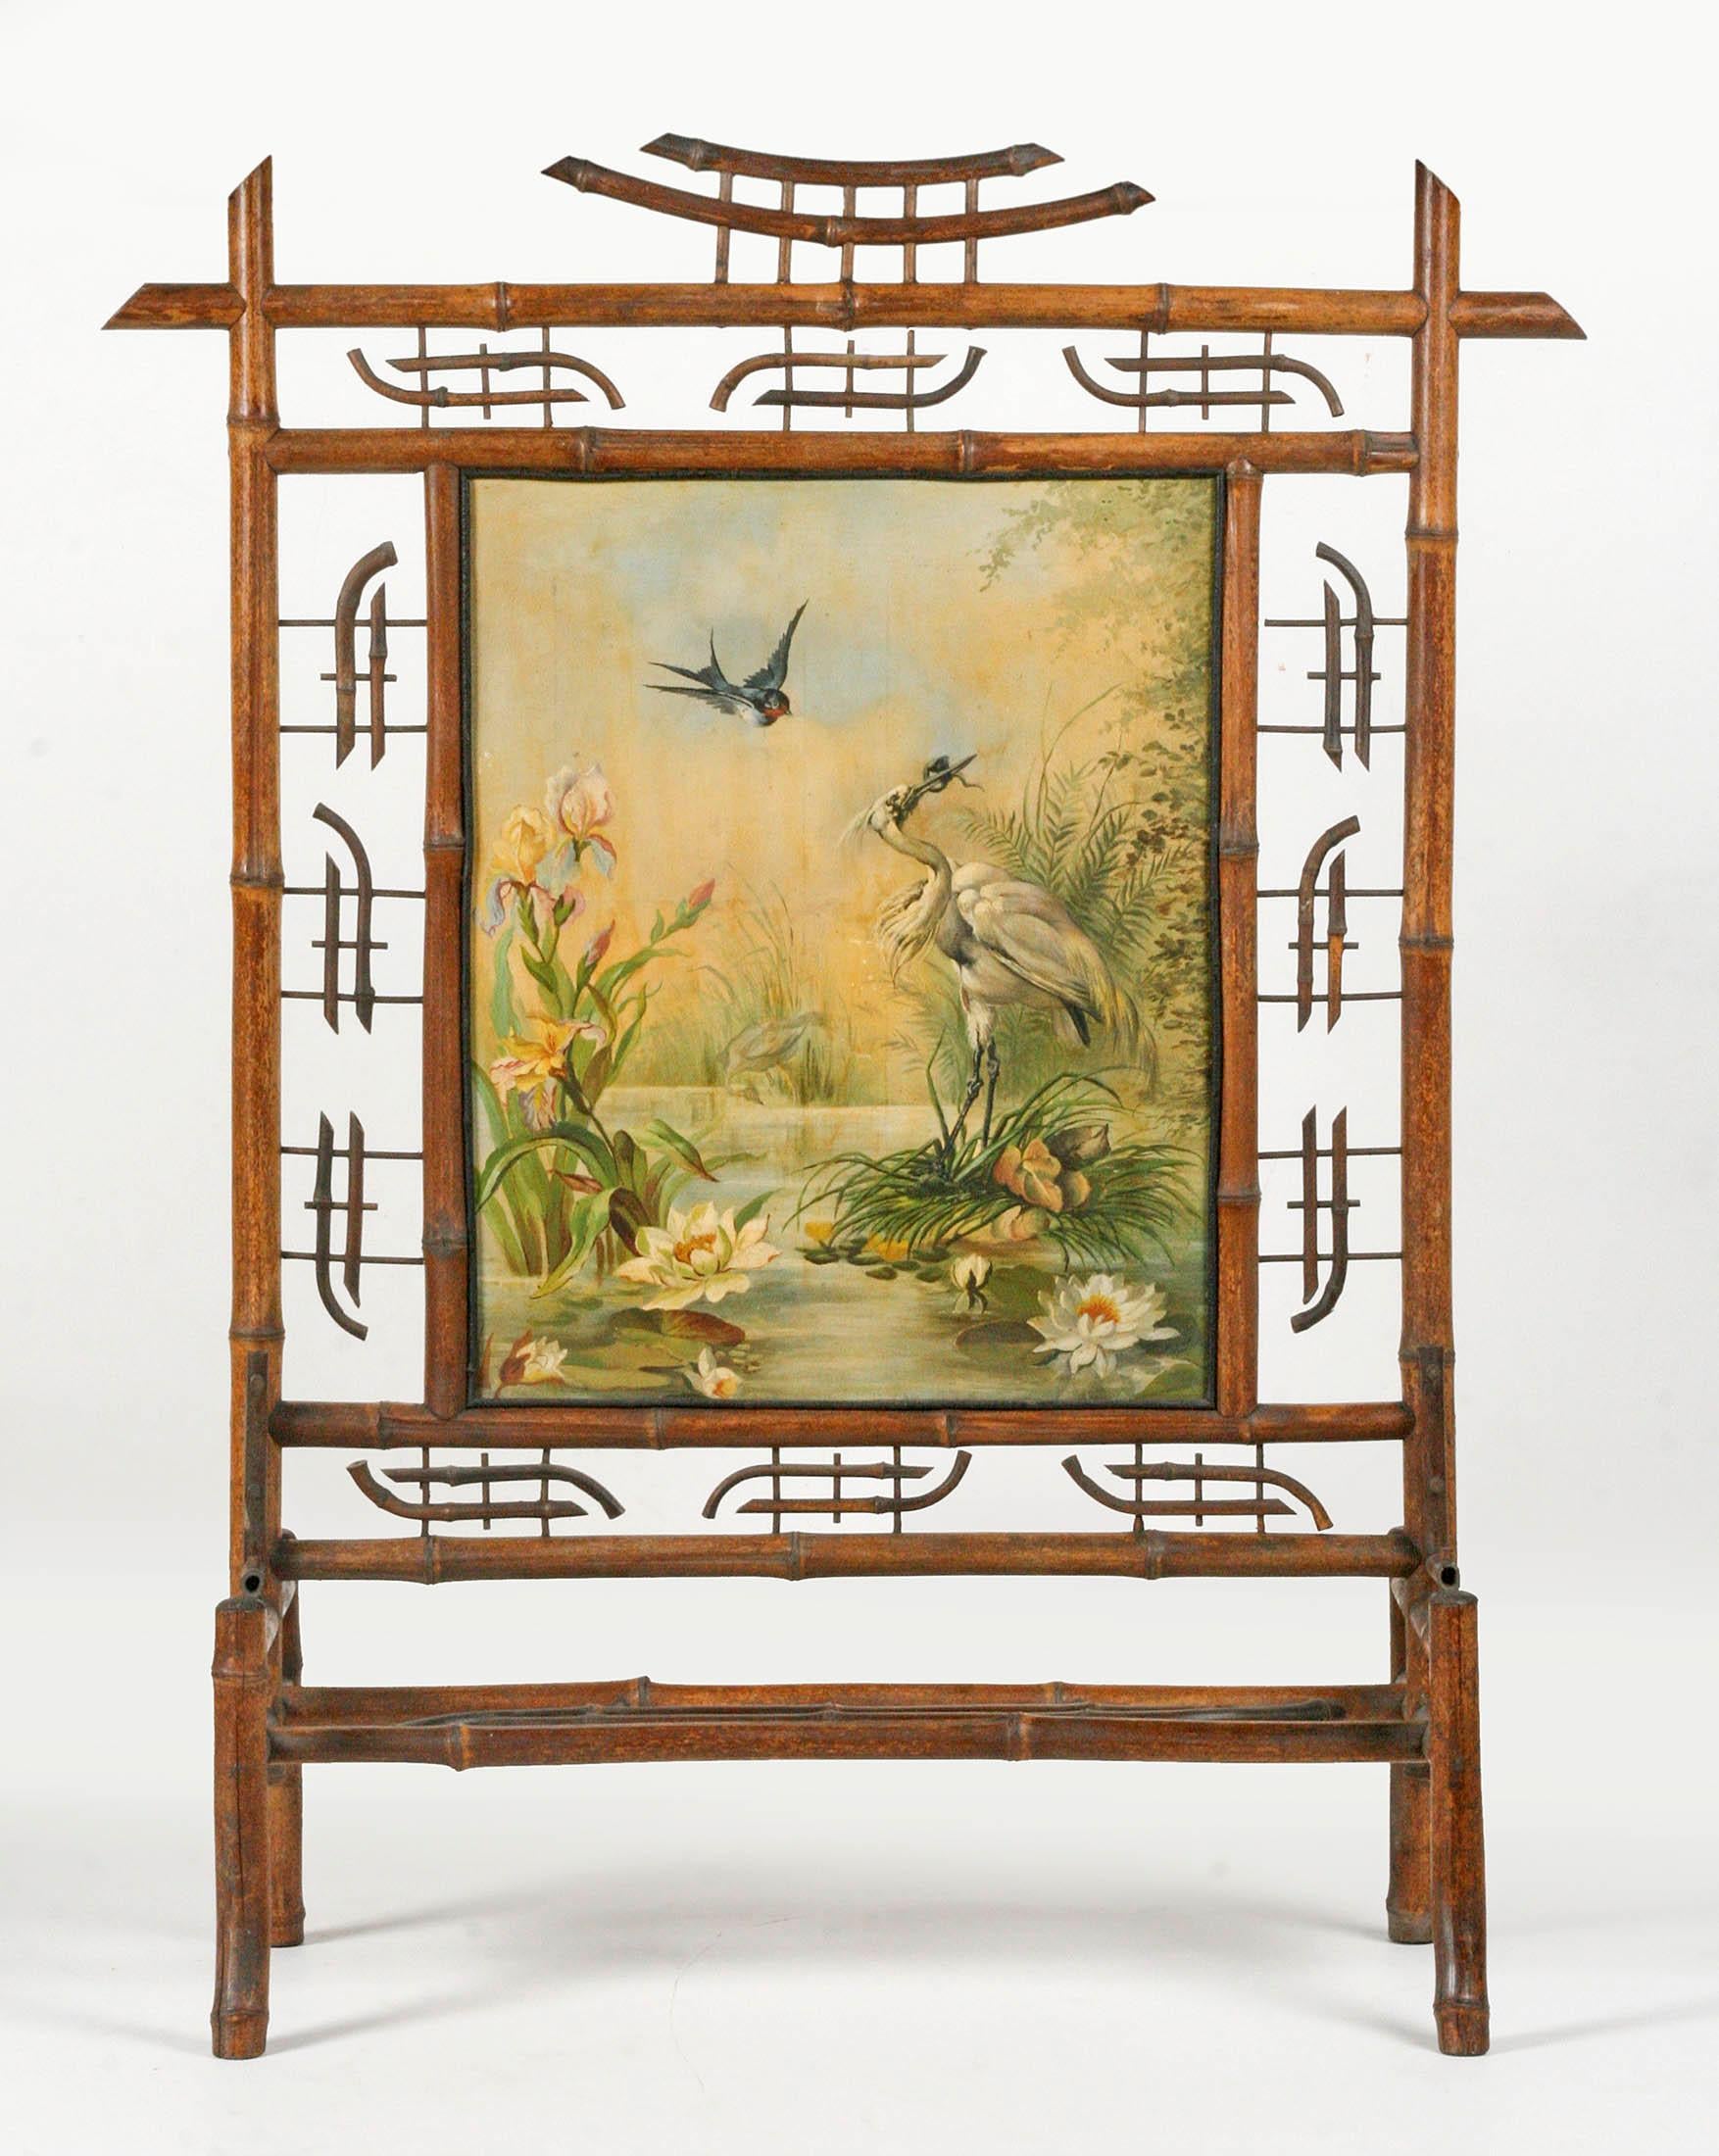 Bamboo wood fireplace screen.
The front has a beautiful painting, this is oil on canvas, with a wooden panel behind it. This painting is painted in a typical early Art Nouveau with many elements from nature and the water world. Colors have been